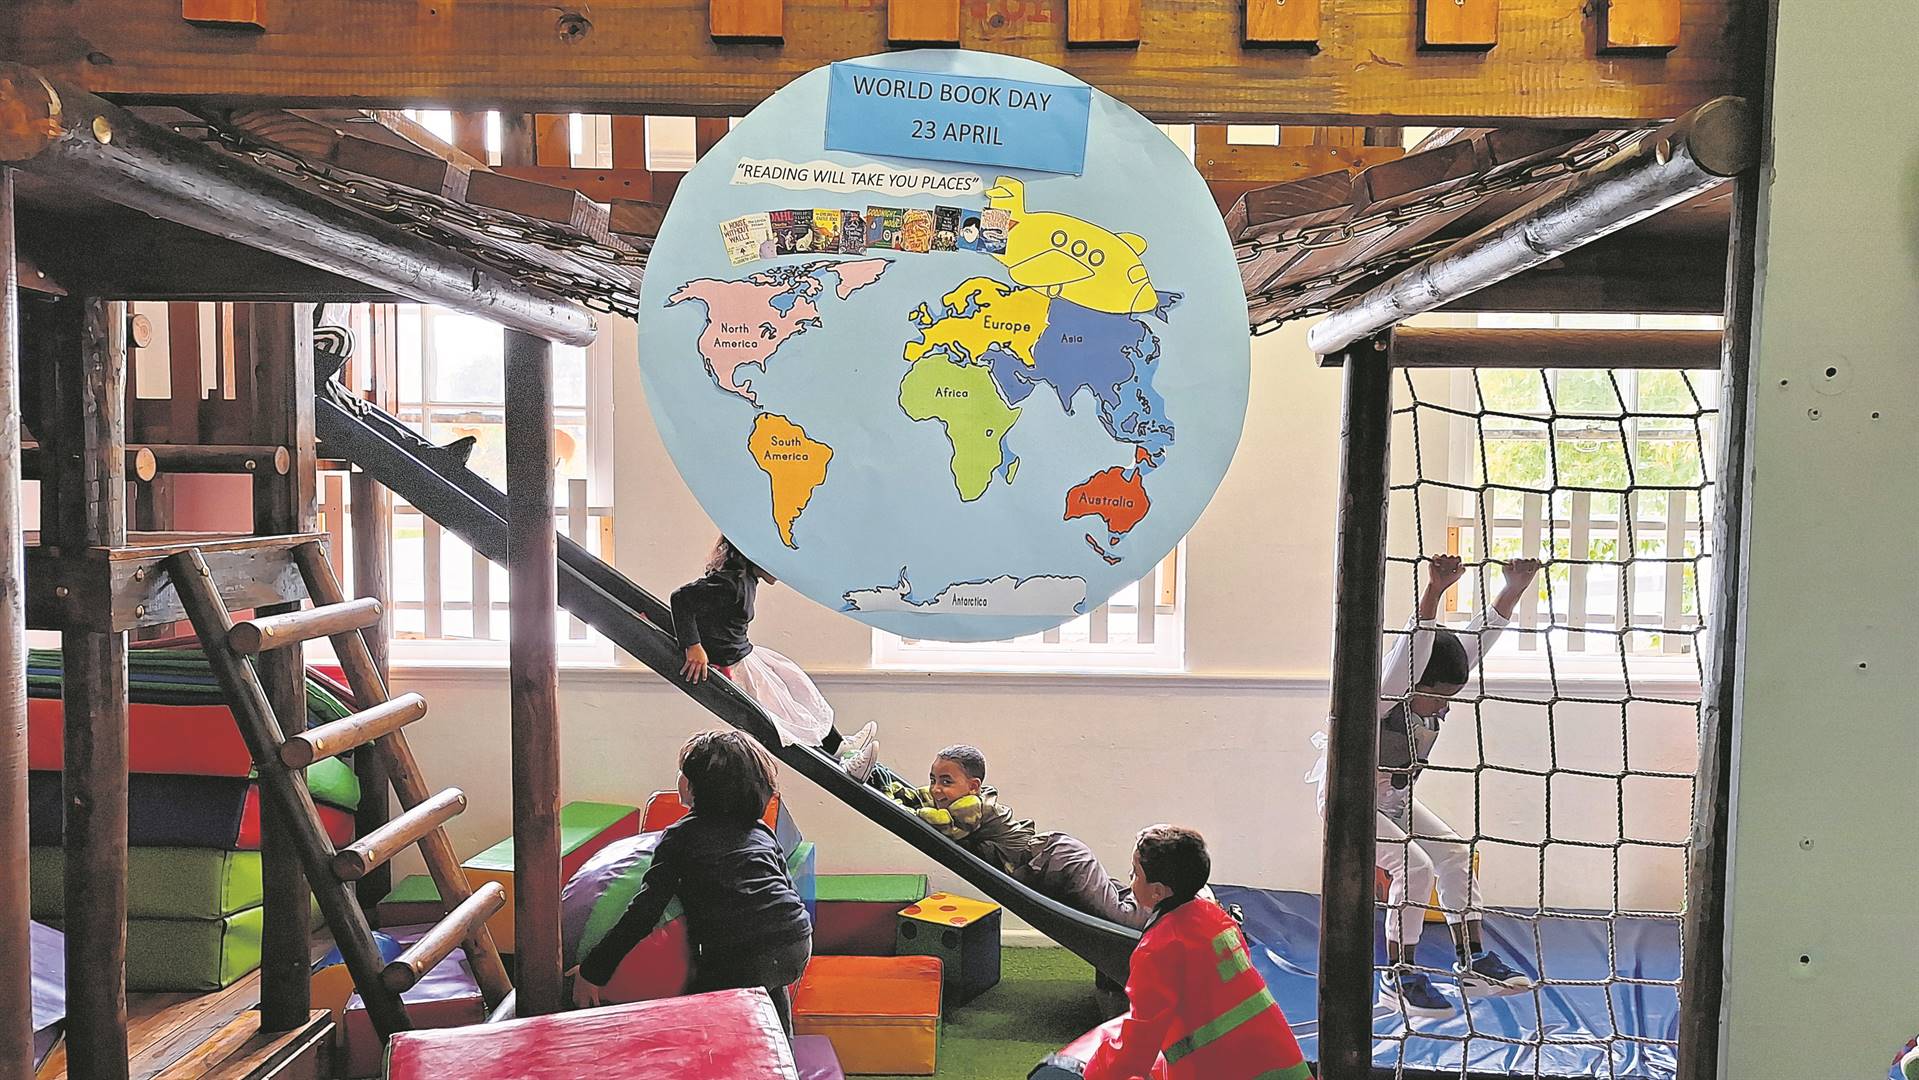 Claremont Library inspires kids to read on World Book Day | News24